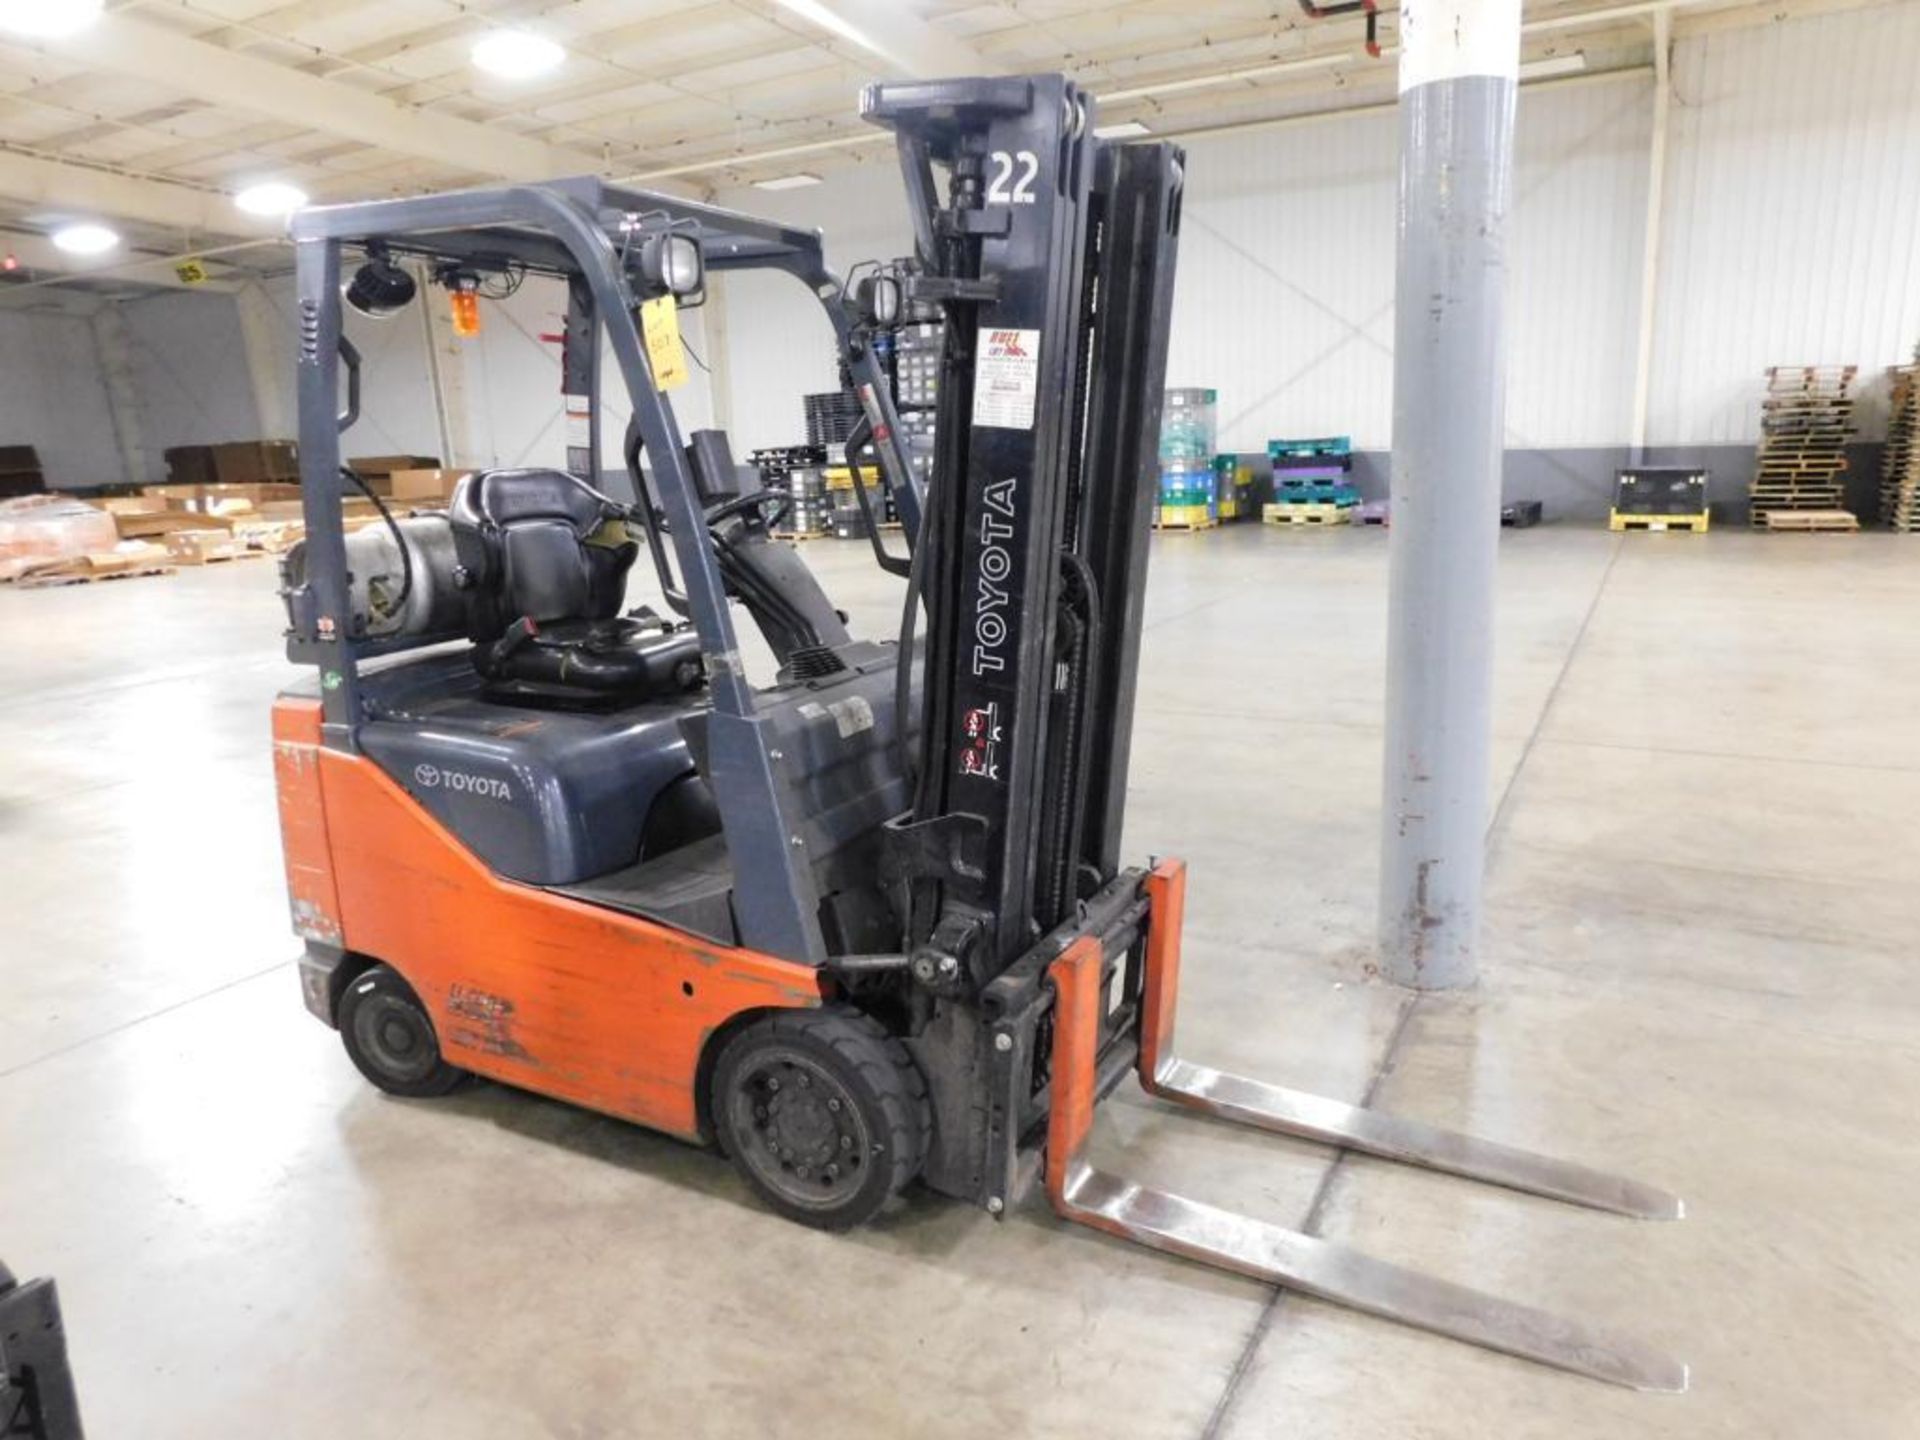 Toyota 8FGCU18 Fork Lift Truck, 3000 Lb. Max. Load Capacity, Overhead Guard, 3- Stage Mast, 189" Max - Image 4 of 12